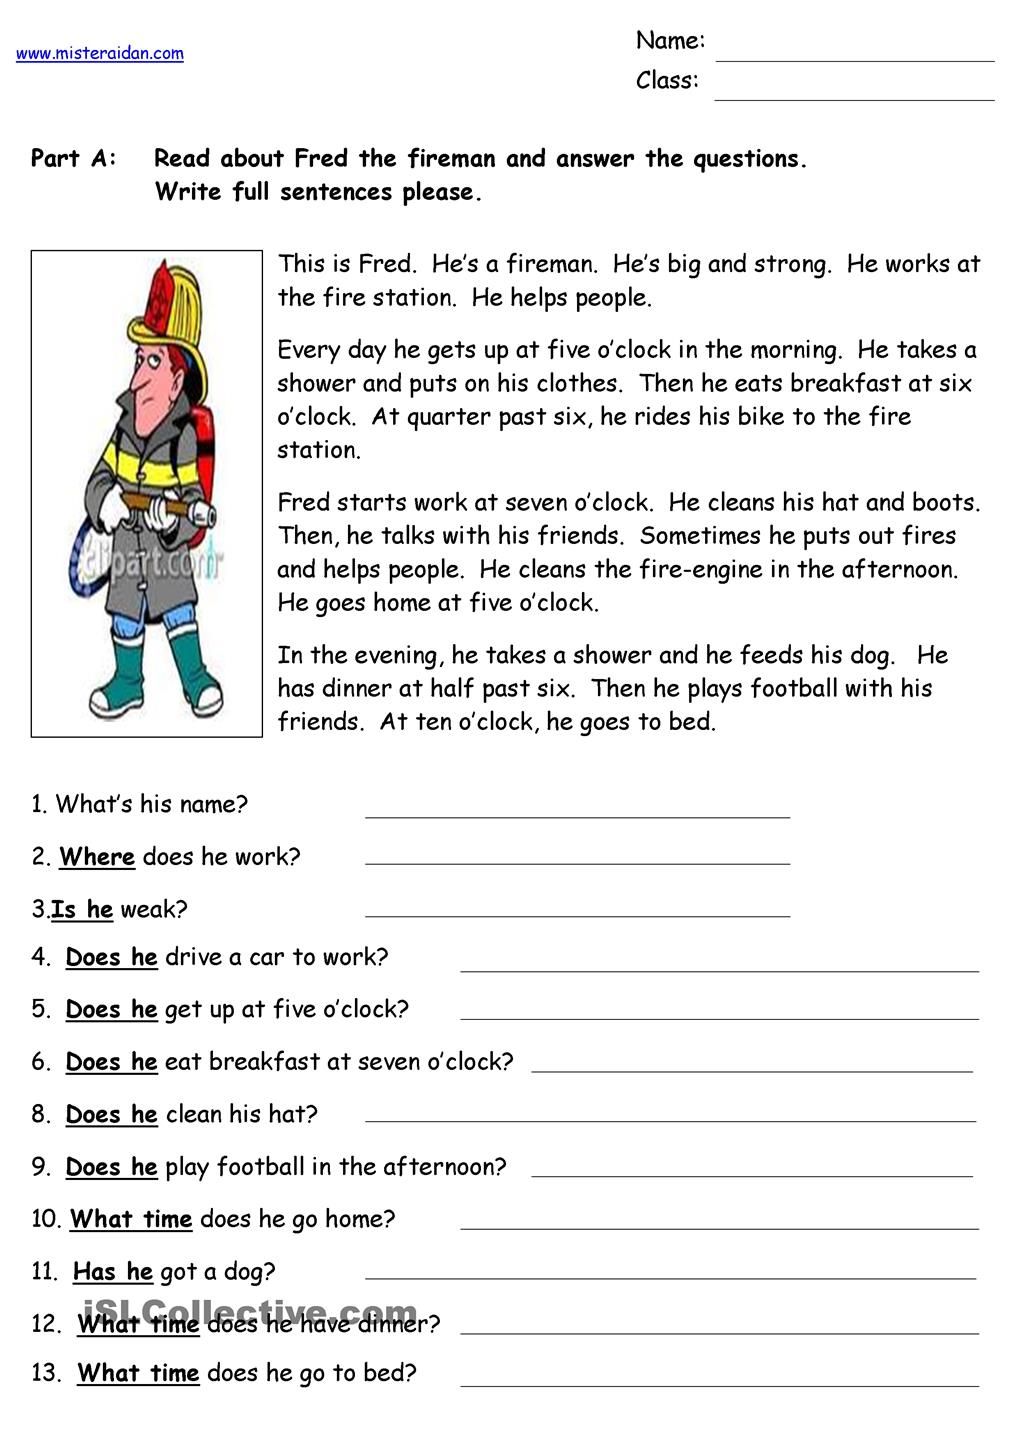 present-simple-reading-interactive-worksheet-in-2021-free-reading-comprehension-worksheets